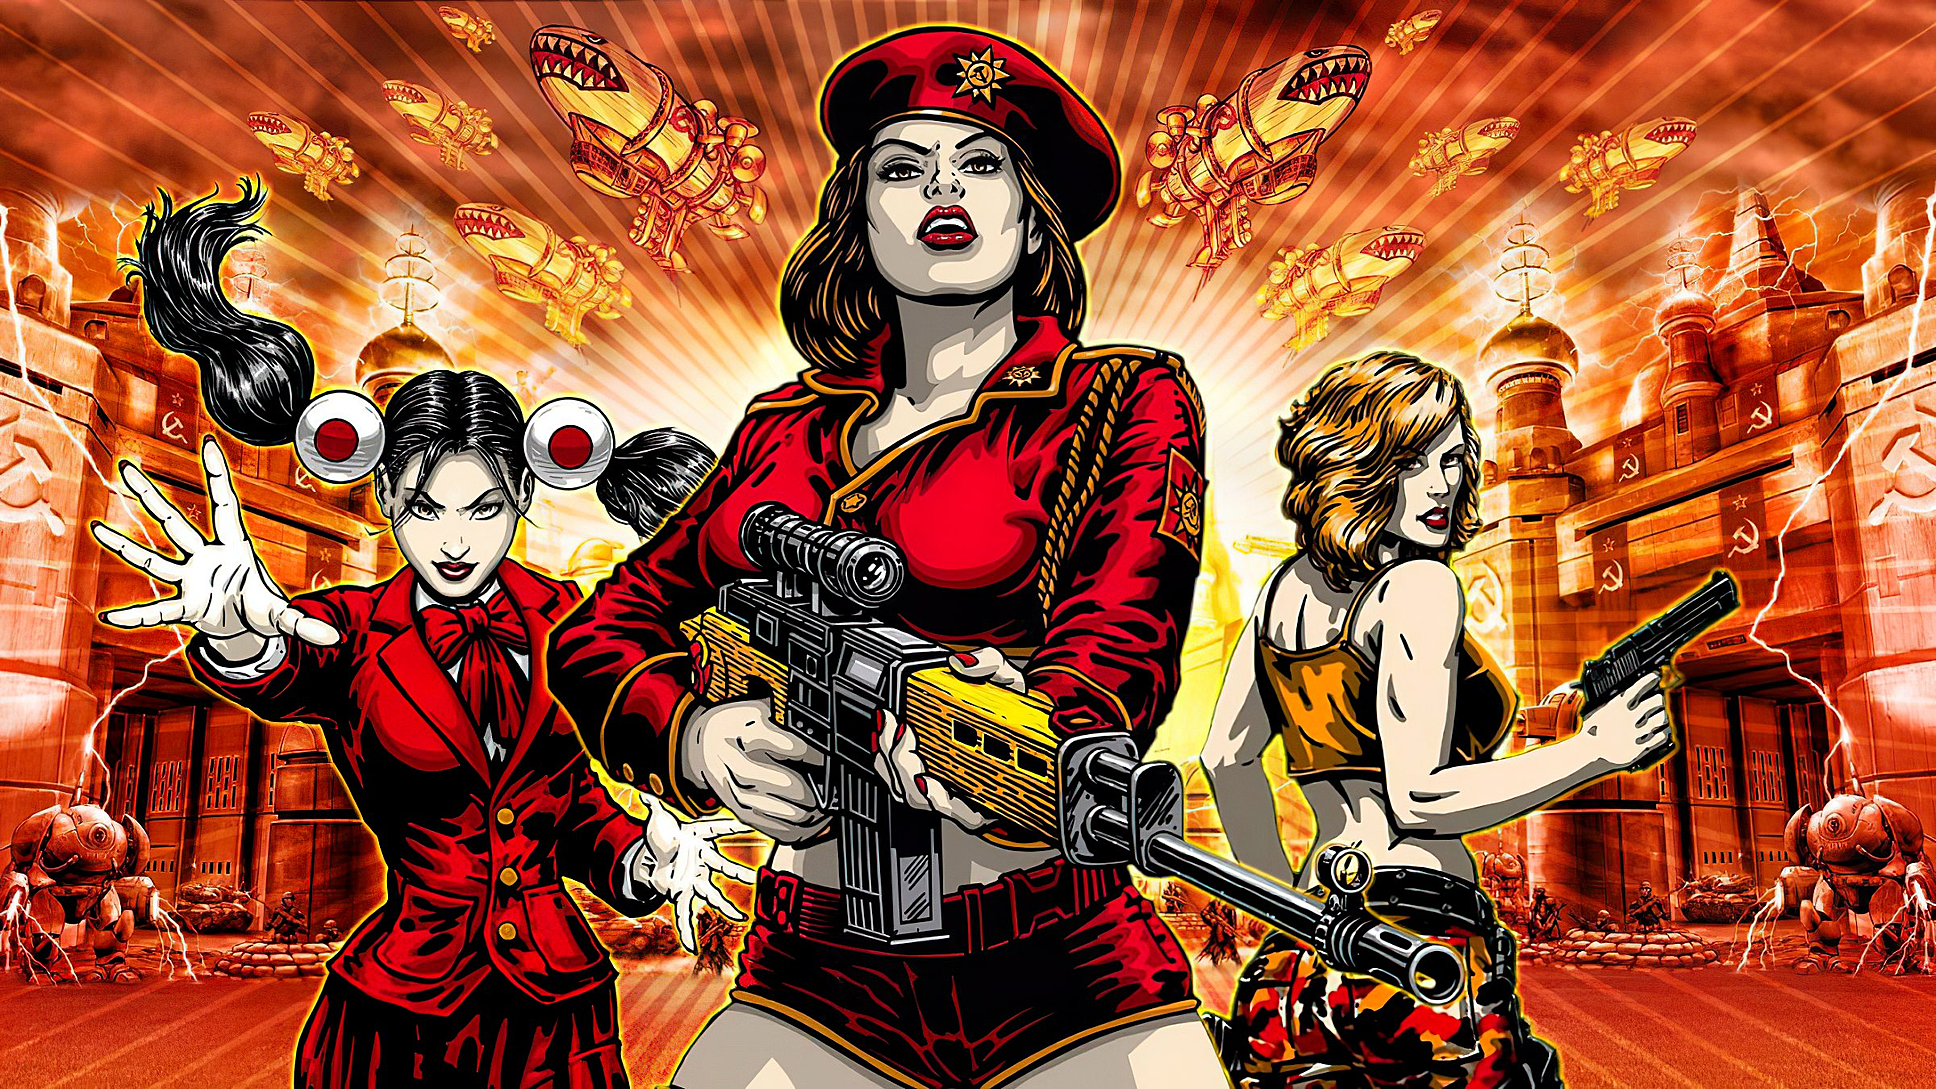 Video Game Command & Conquer: Red Alert 3 HD Wallpaper | Background Image